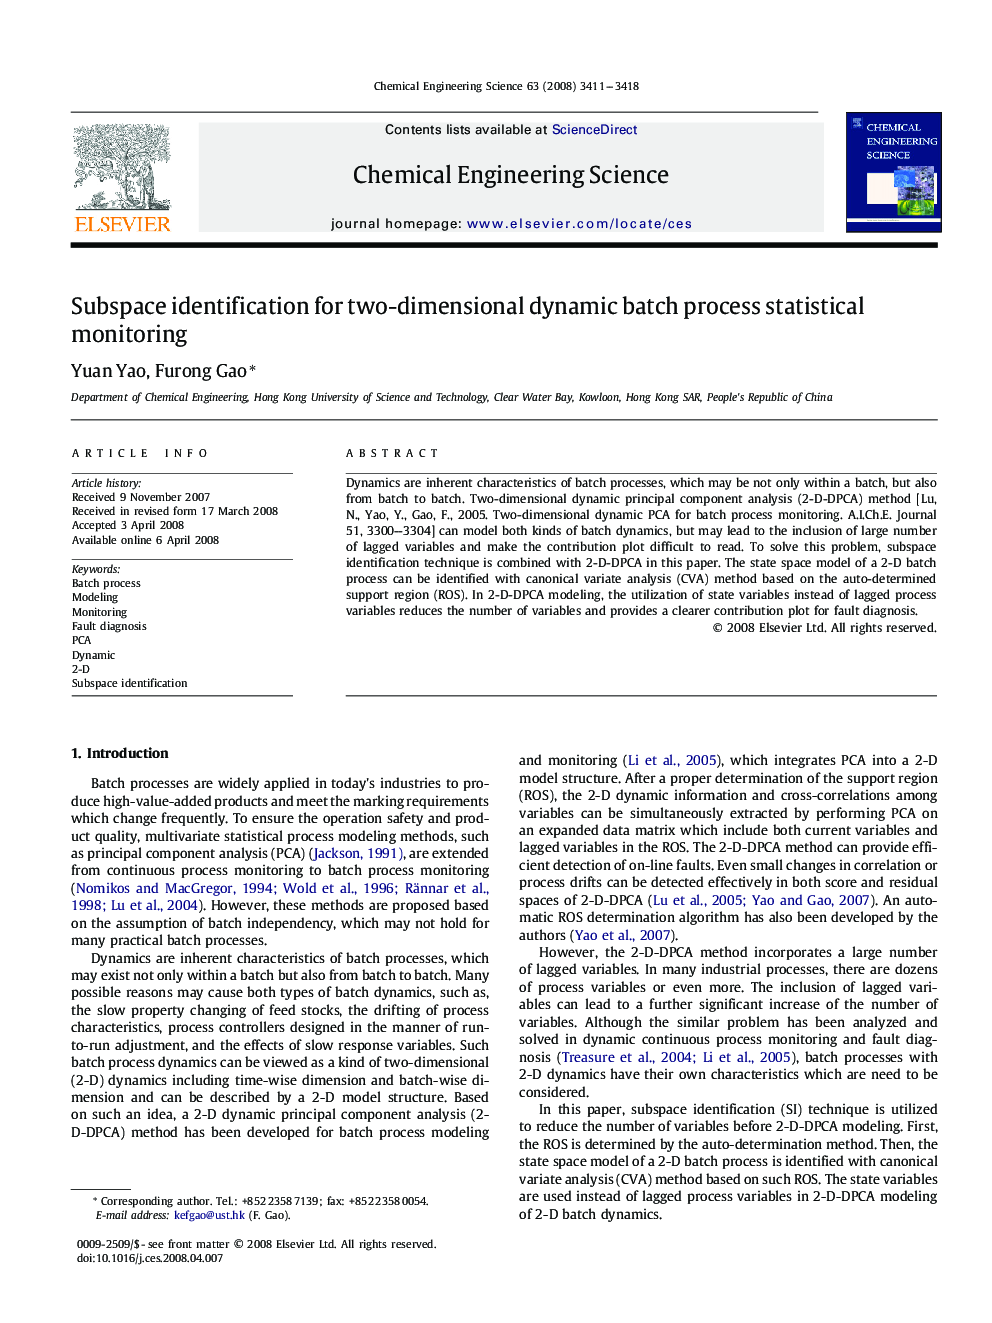 Subspace identification for two-dimensional dynamic batch process statistical monitoring